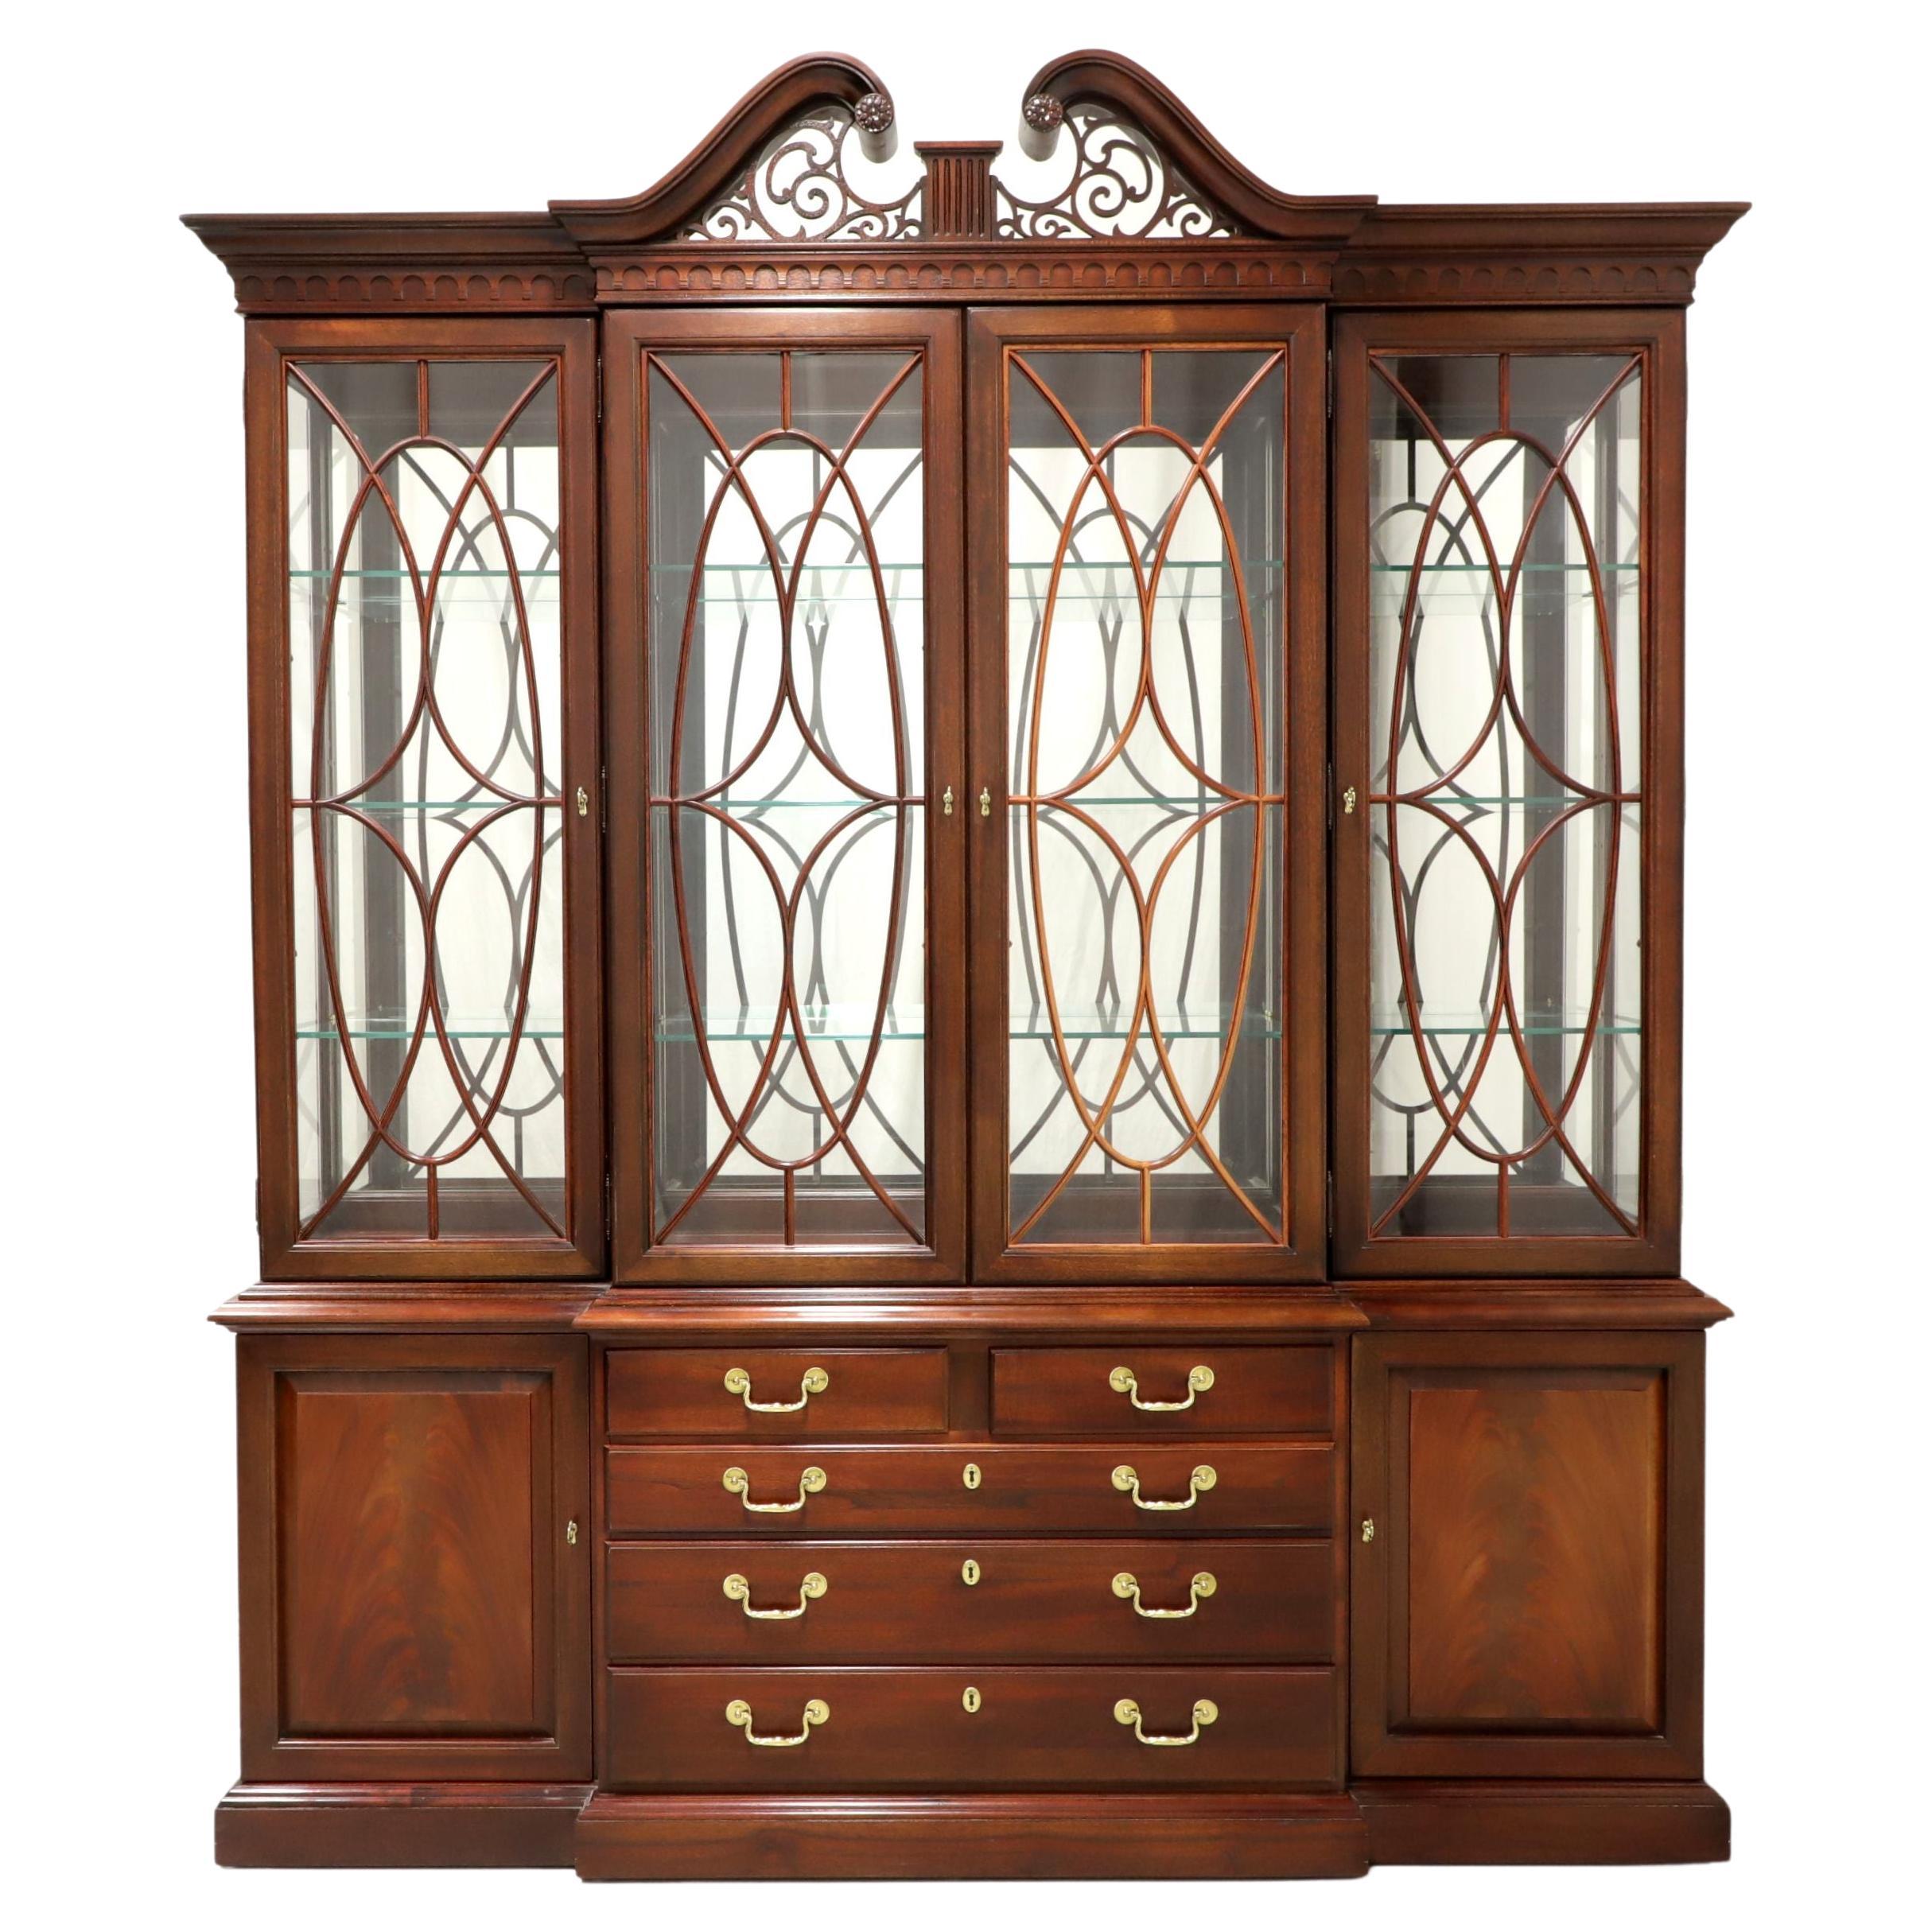 THOMASVILLE Mahogany Chippendale Style Breakfront China Cabinet